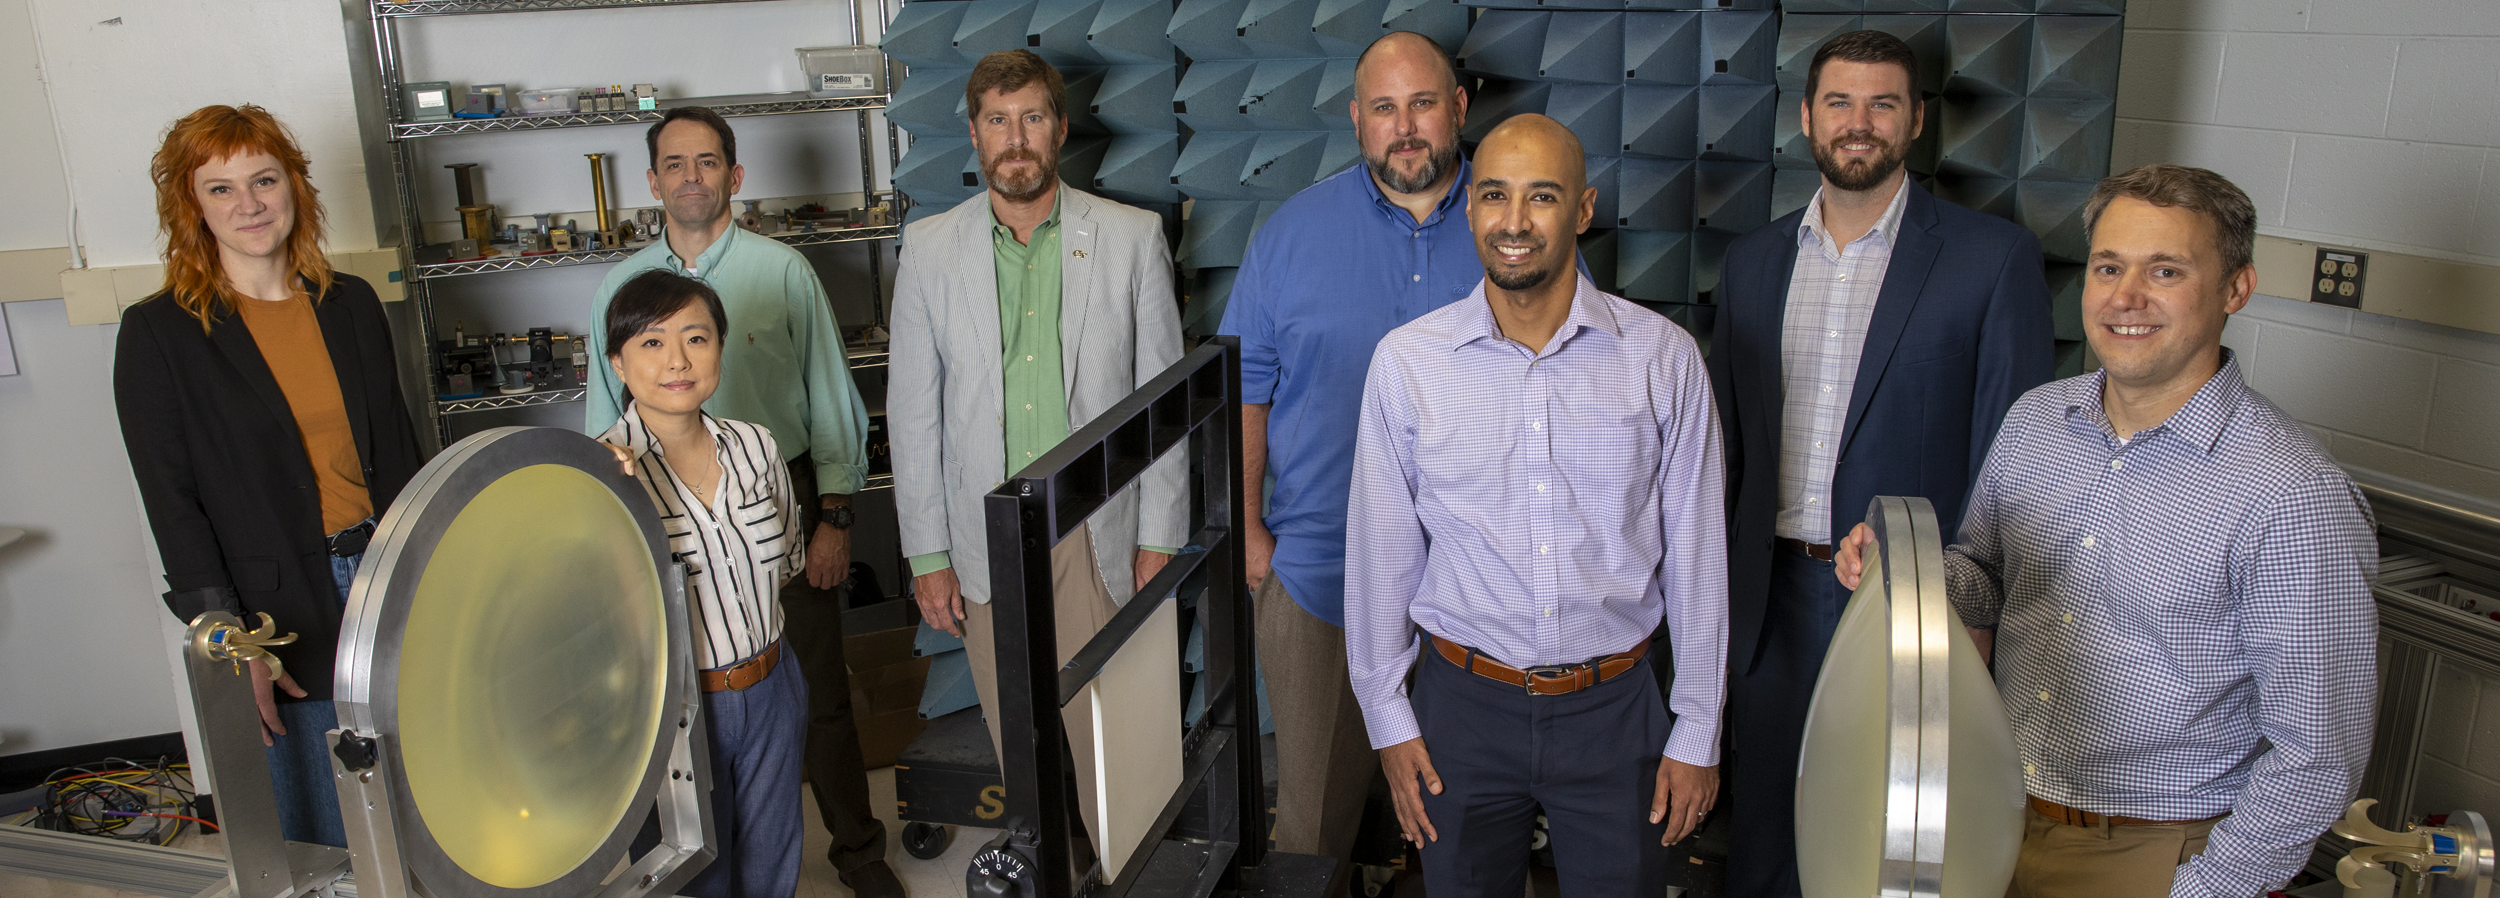 Group photo of Hypersonics faculty at Georgia Tech